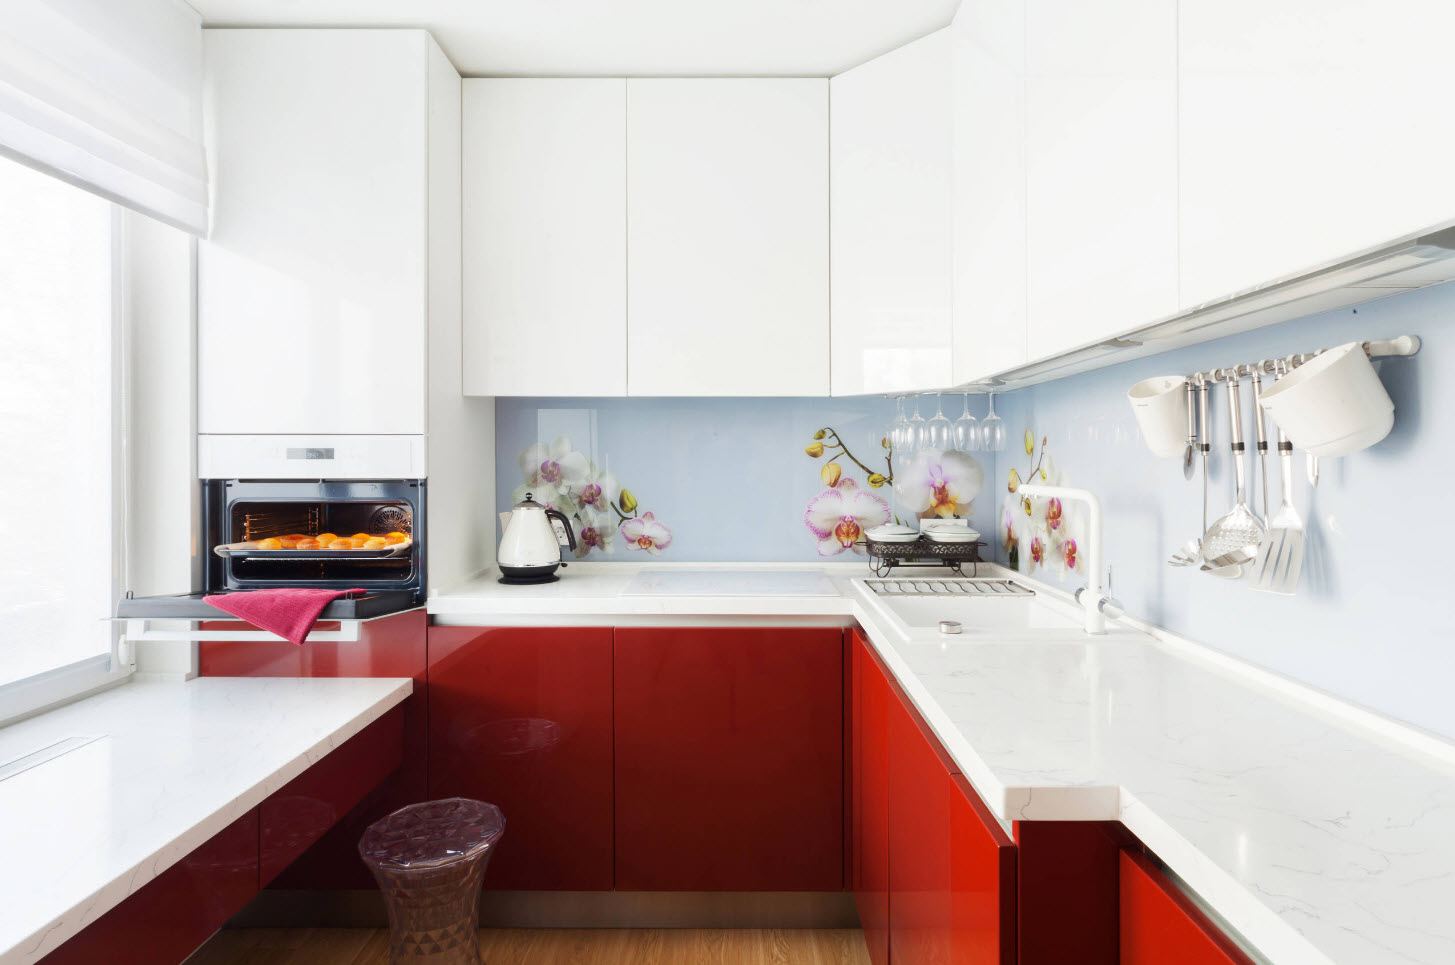 White and red color solution for kitchen